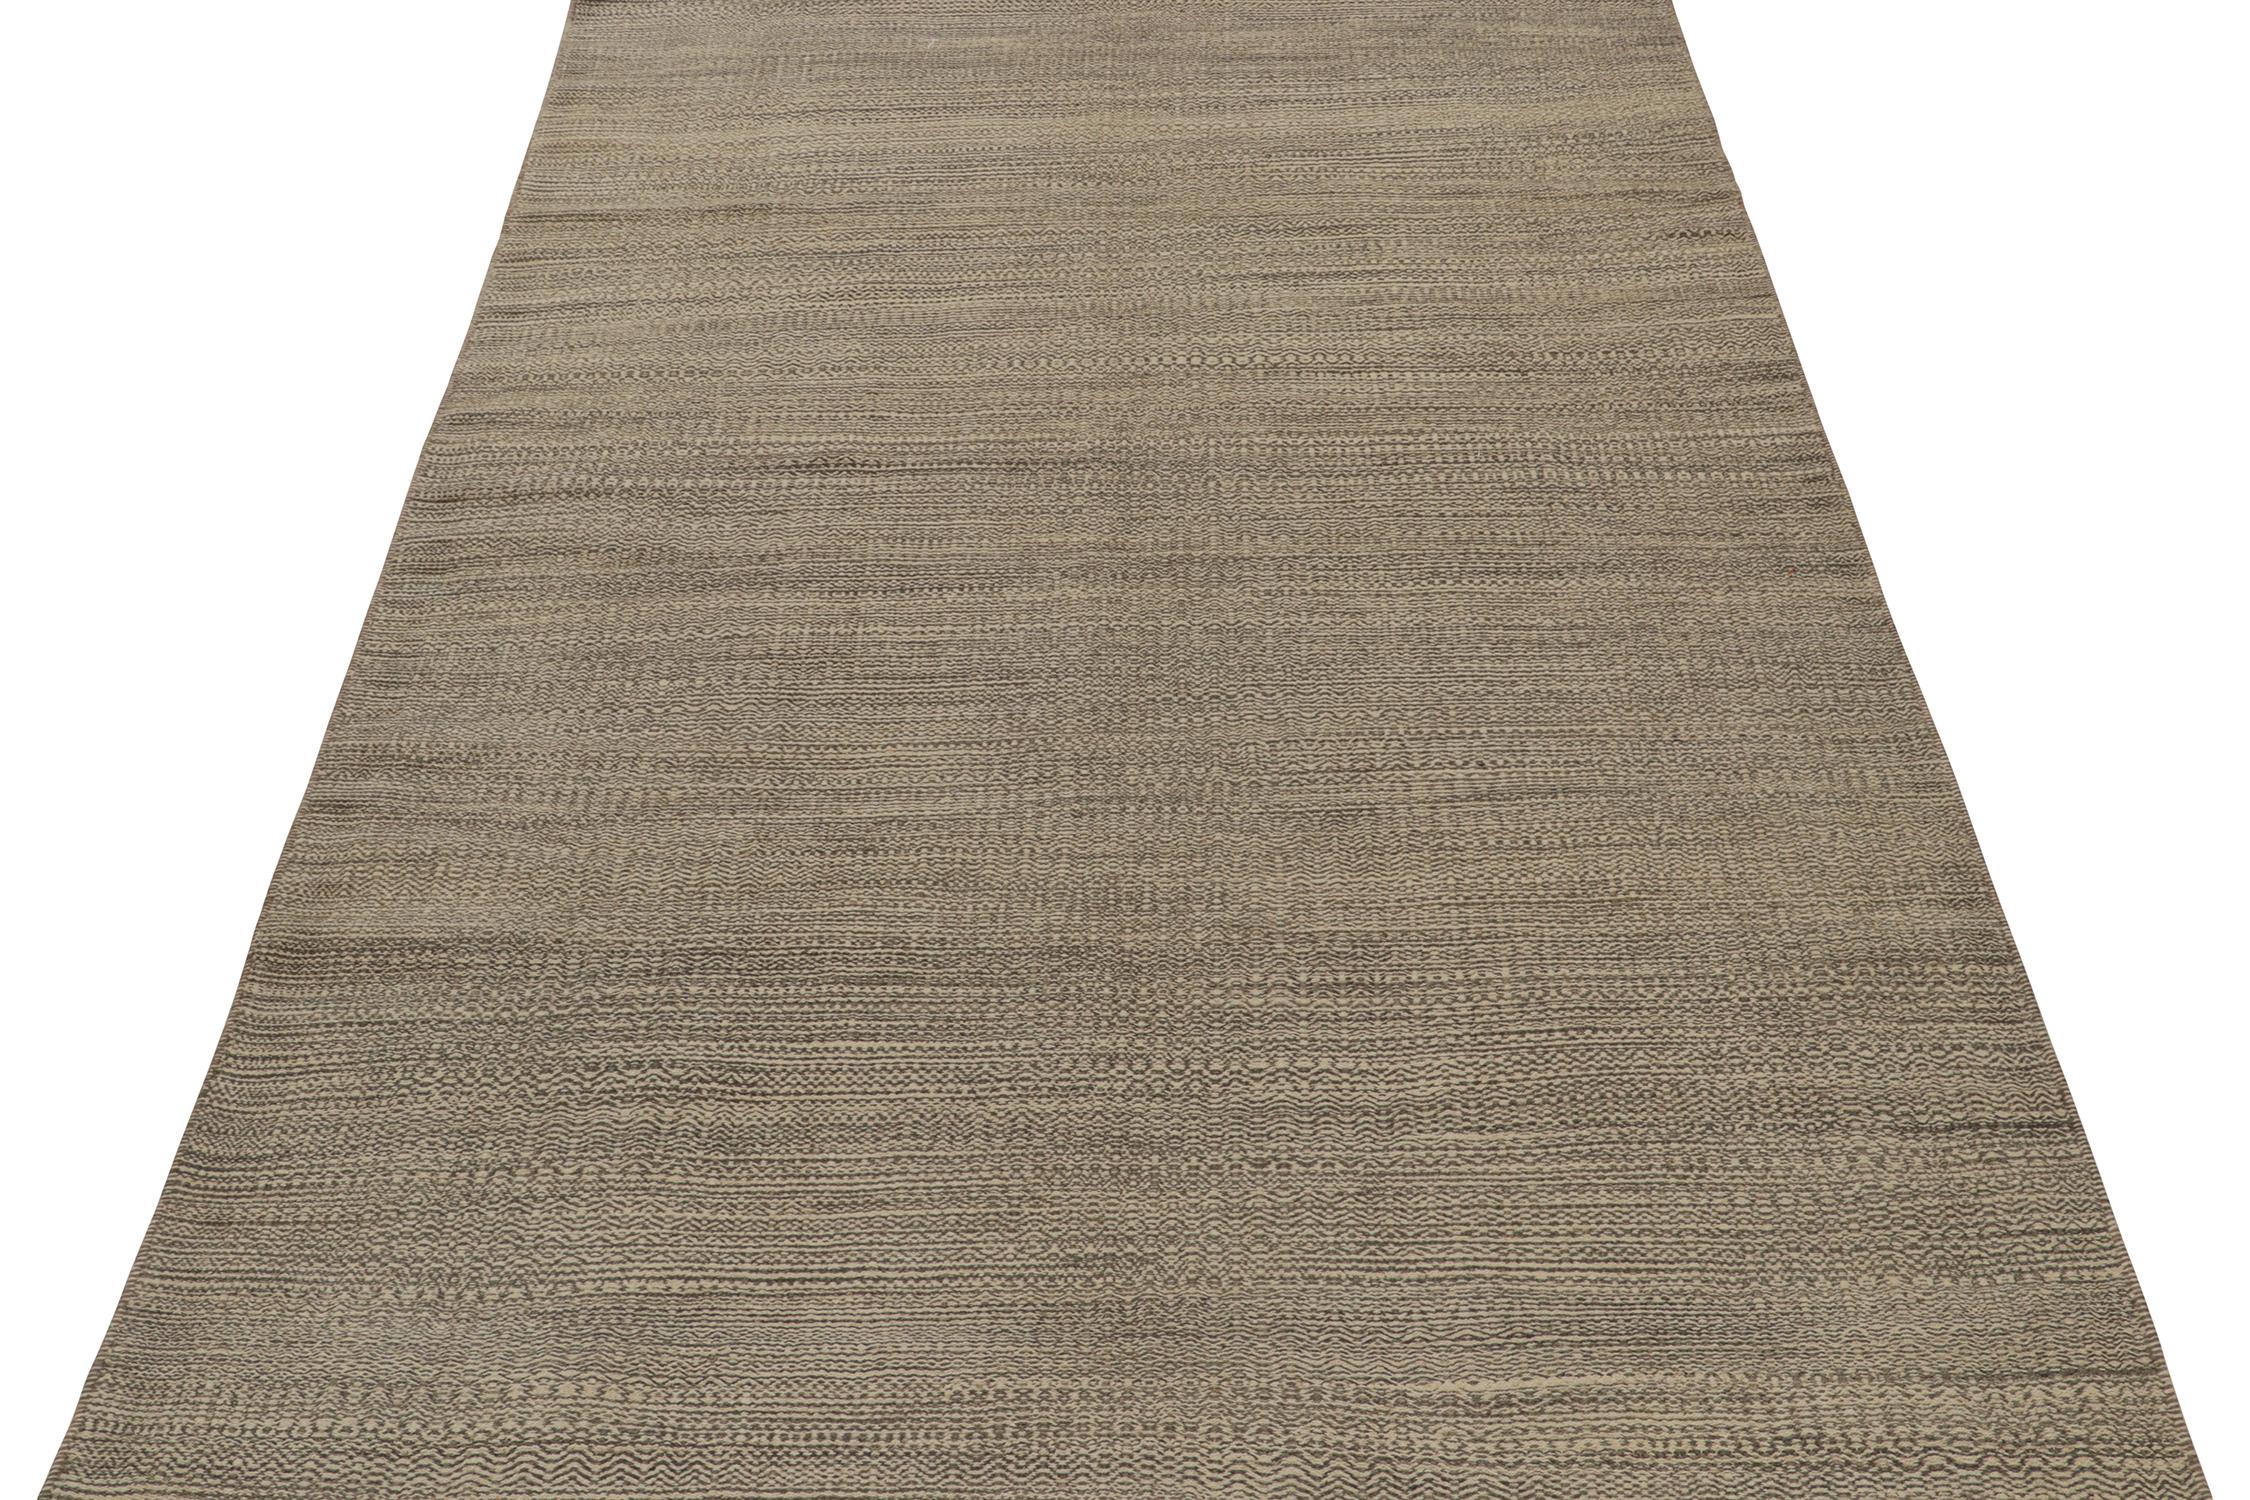 Modern Rug & Kilim’s Contemporary Persian Kilim in Beige-Brown Stripes For Sale